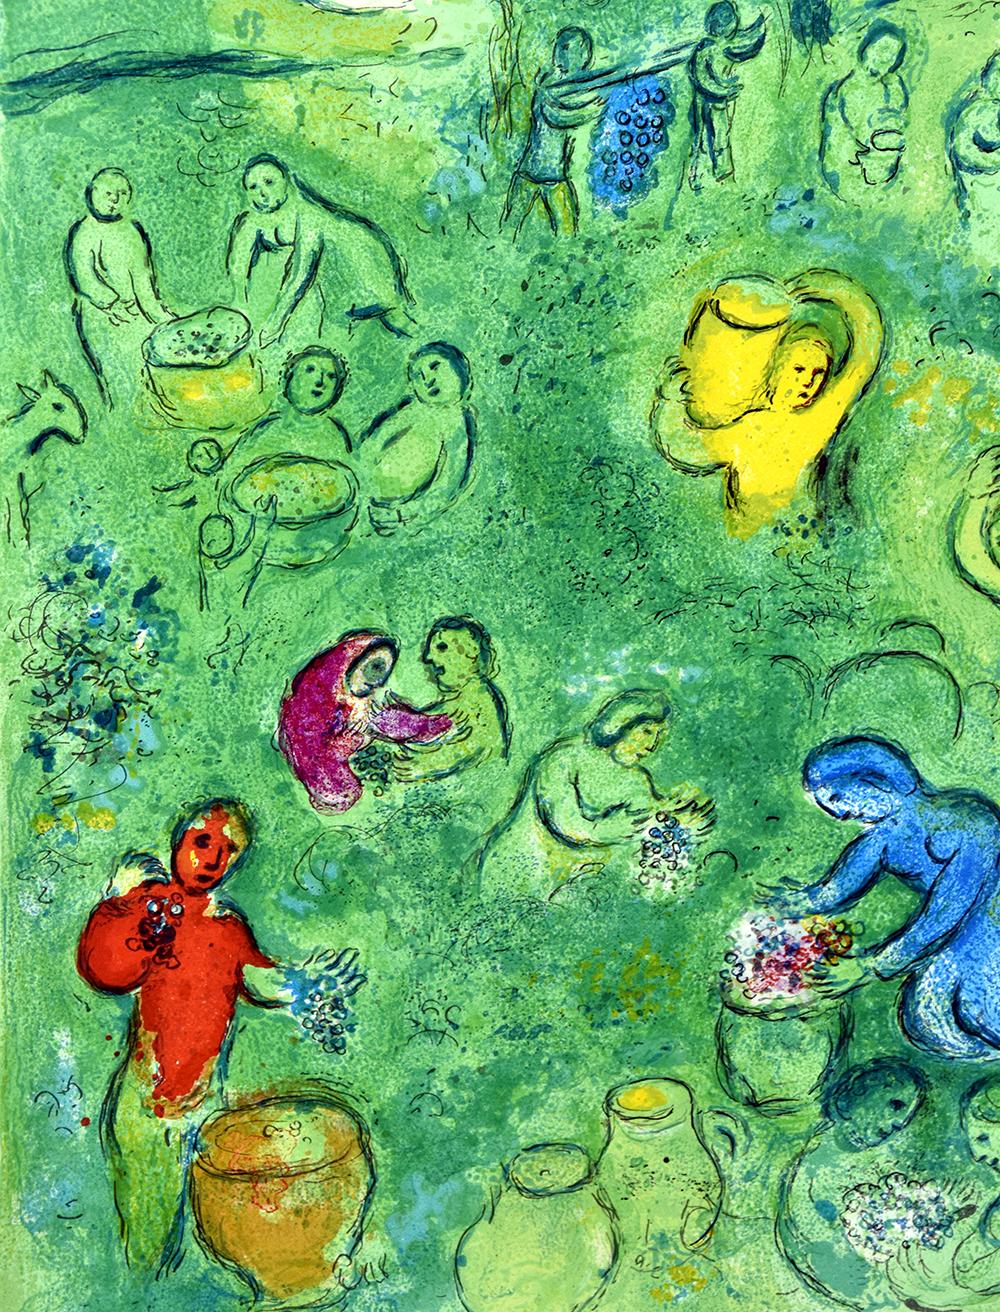 Les Vendanges (The Wine Harvest), from Daphnis et Chloé - Modern Print by Marc Chagall